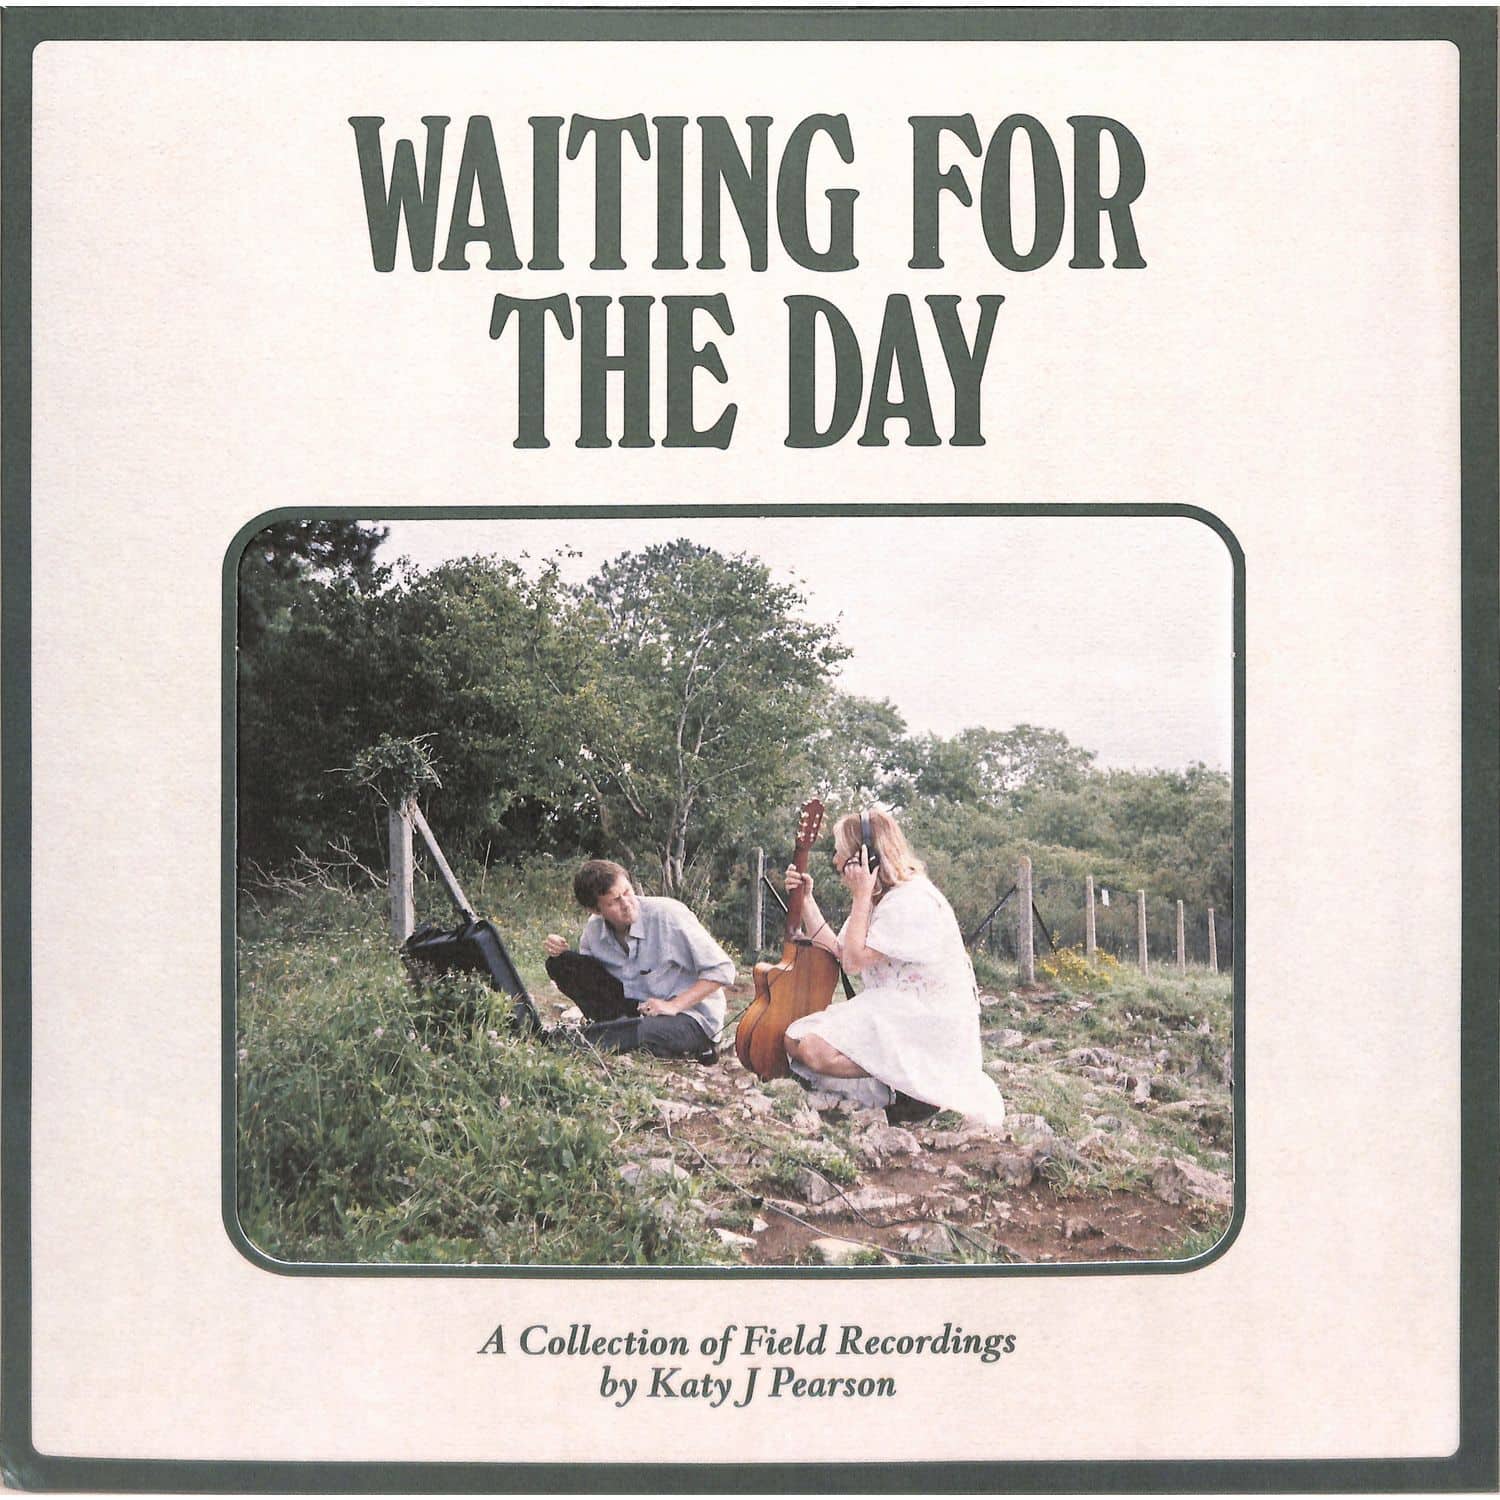 Katy J Pearson - WAITING FOR THE DAY 